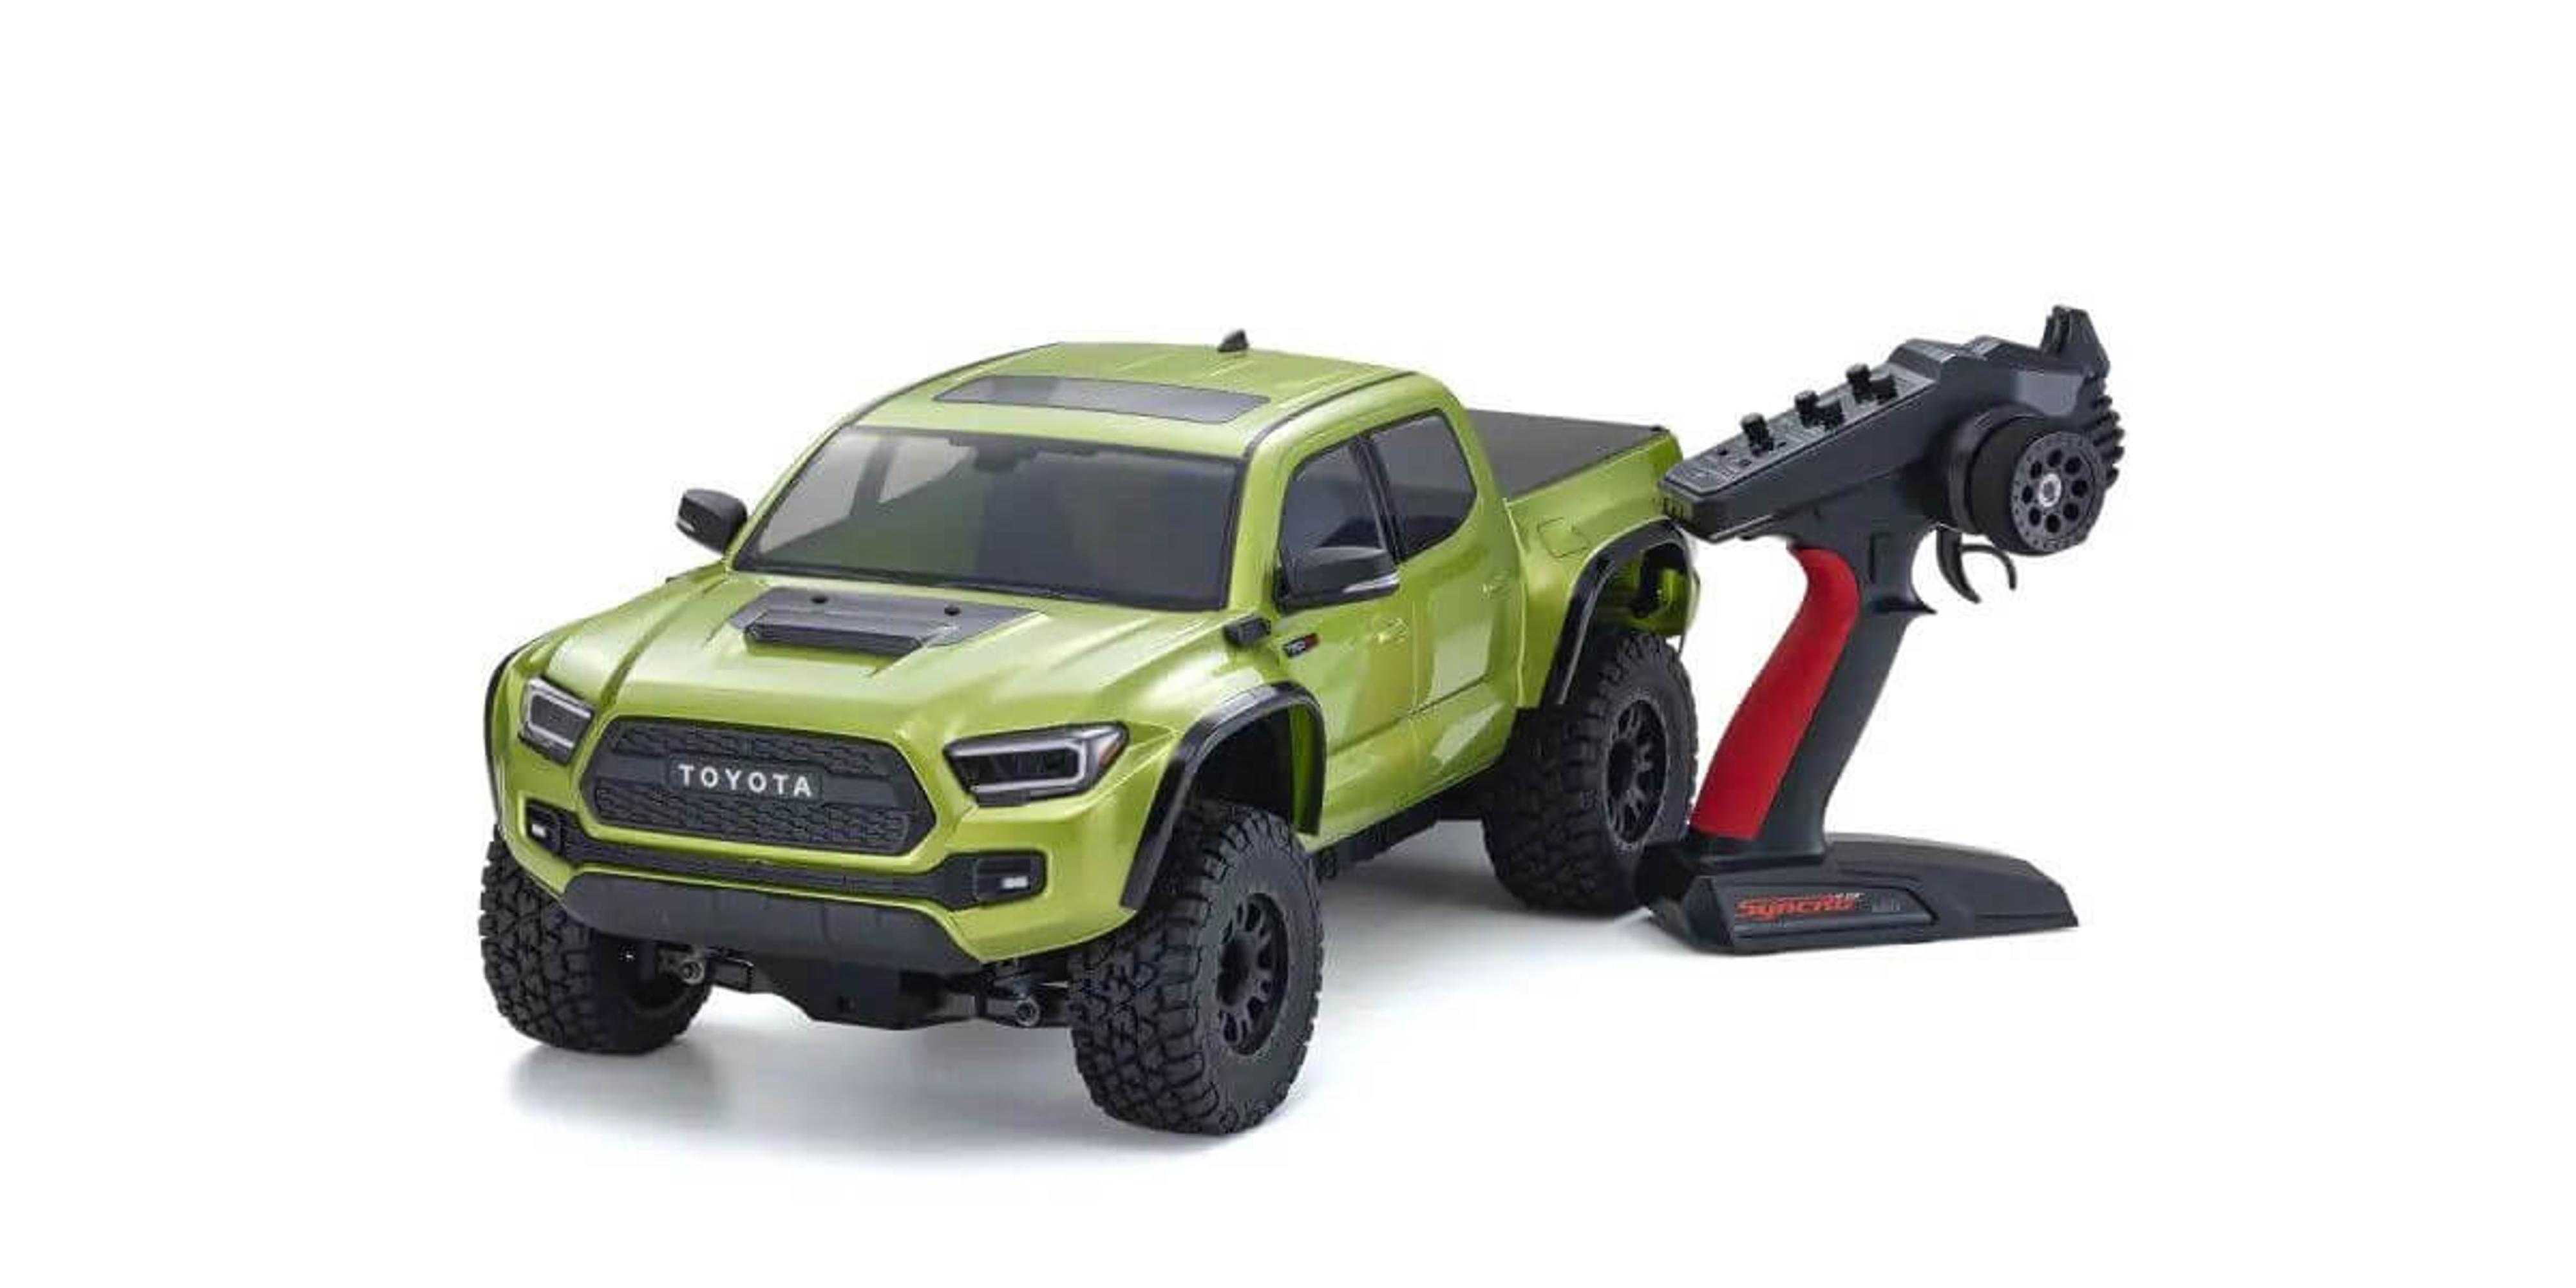 2021 Toyota Tacoma 4WD KB10L Readyset TRD Pro RTR R/C (Electric Lime)